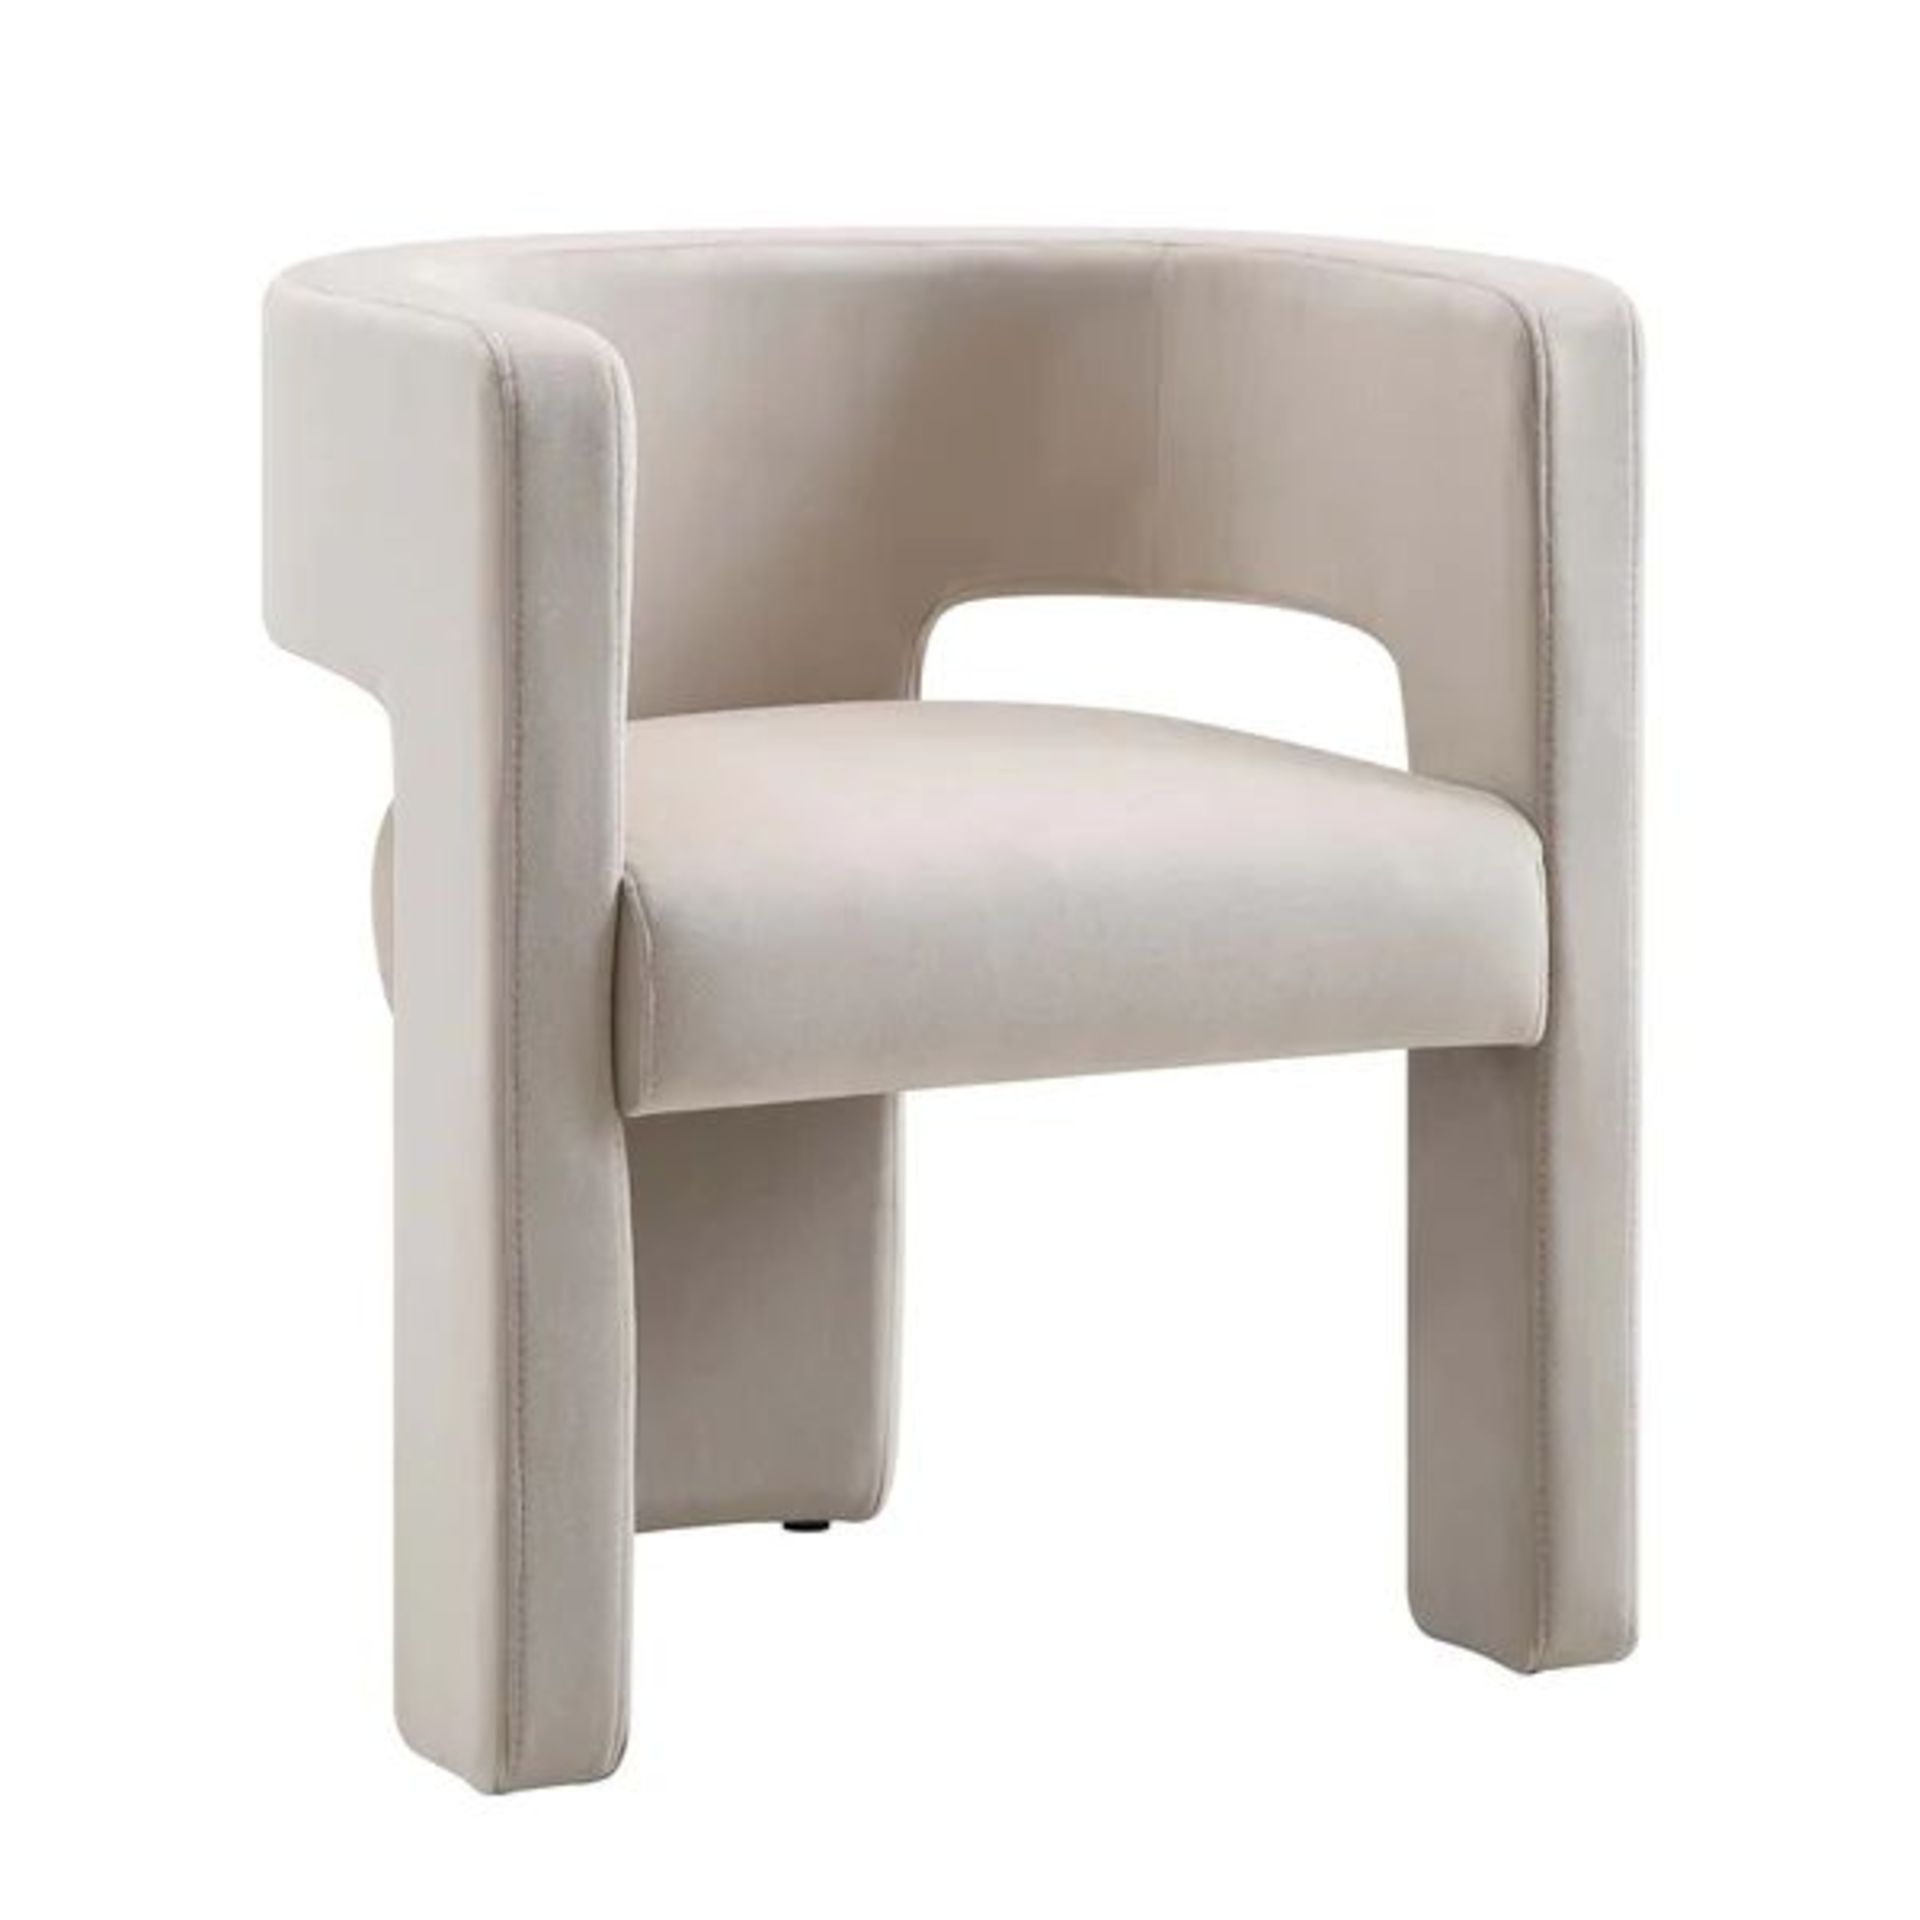 Greenwich Champagne Velvet Dining Chair. - R19.4. RRP £219.99. Our beautiful Greenwich chair - Image 2 of 2